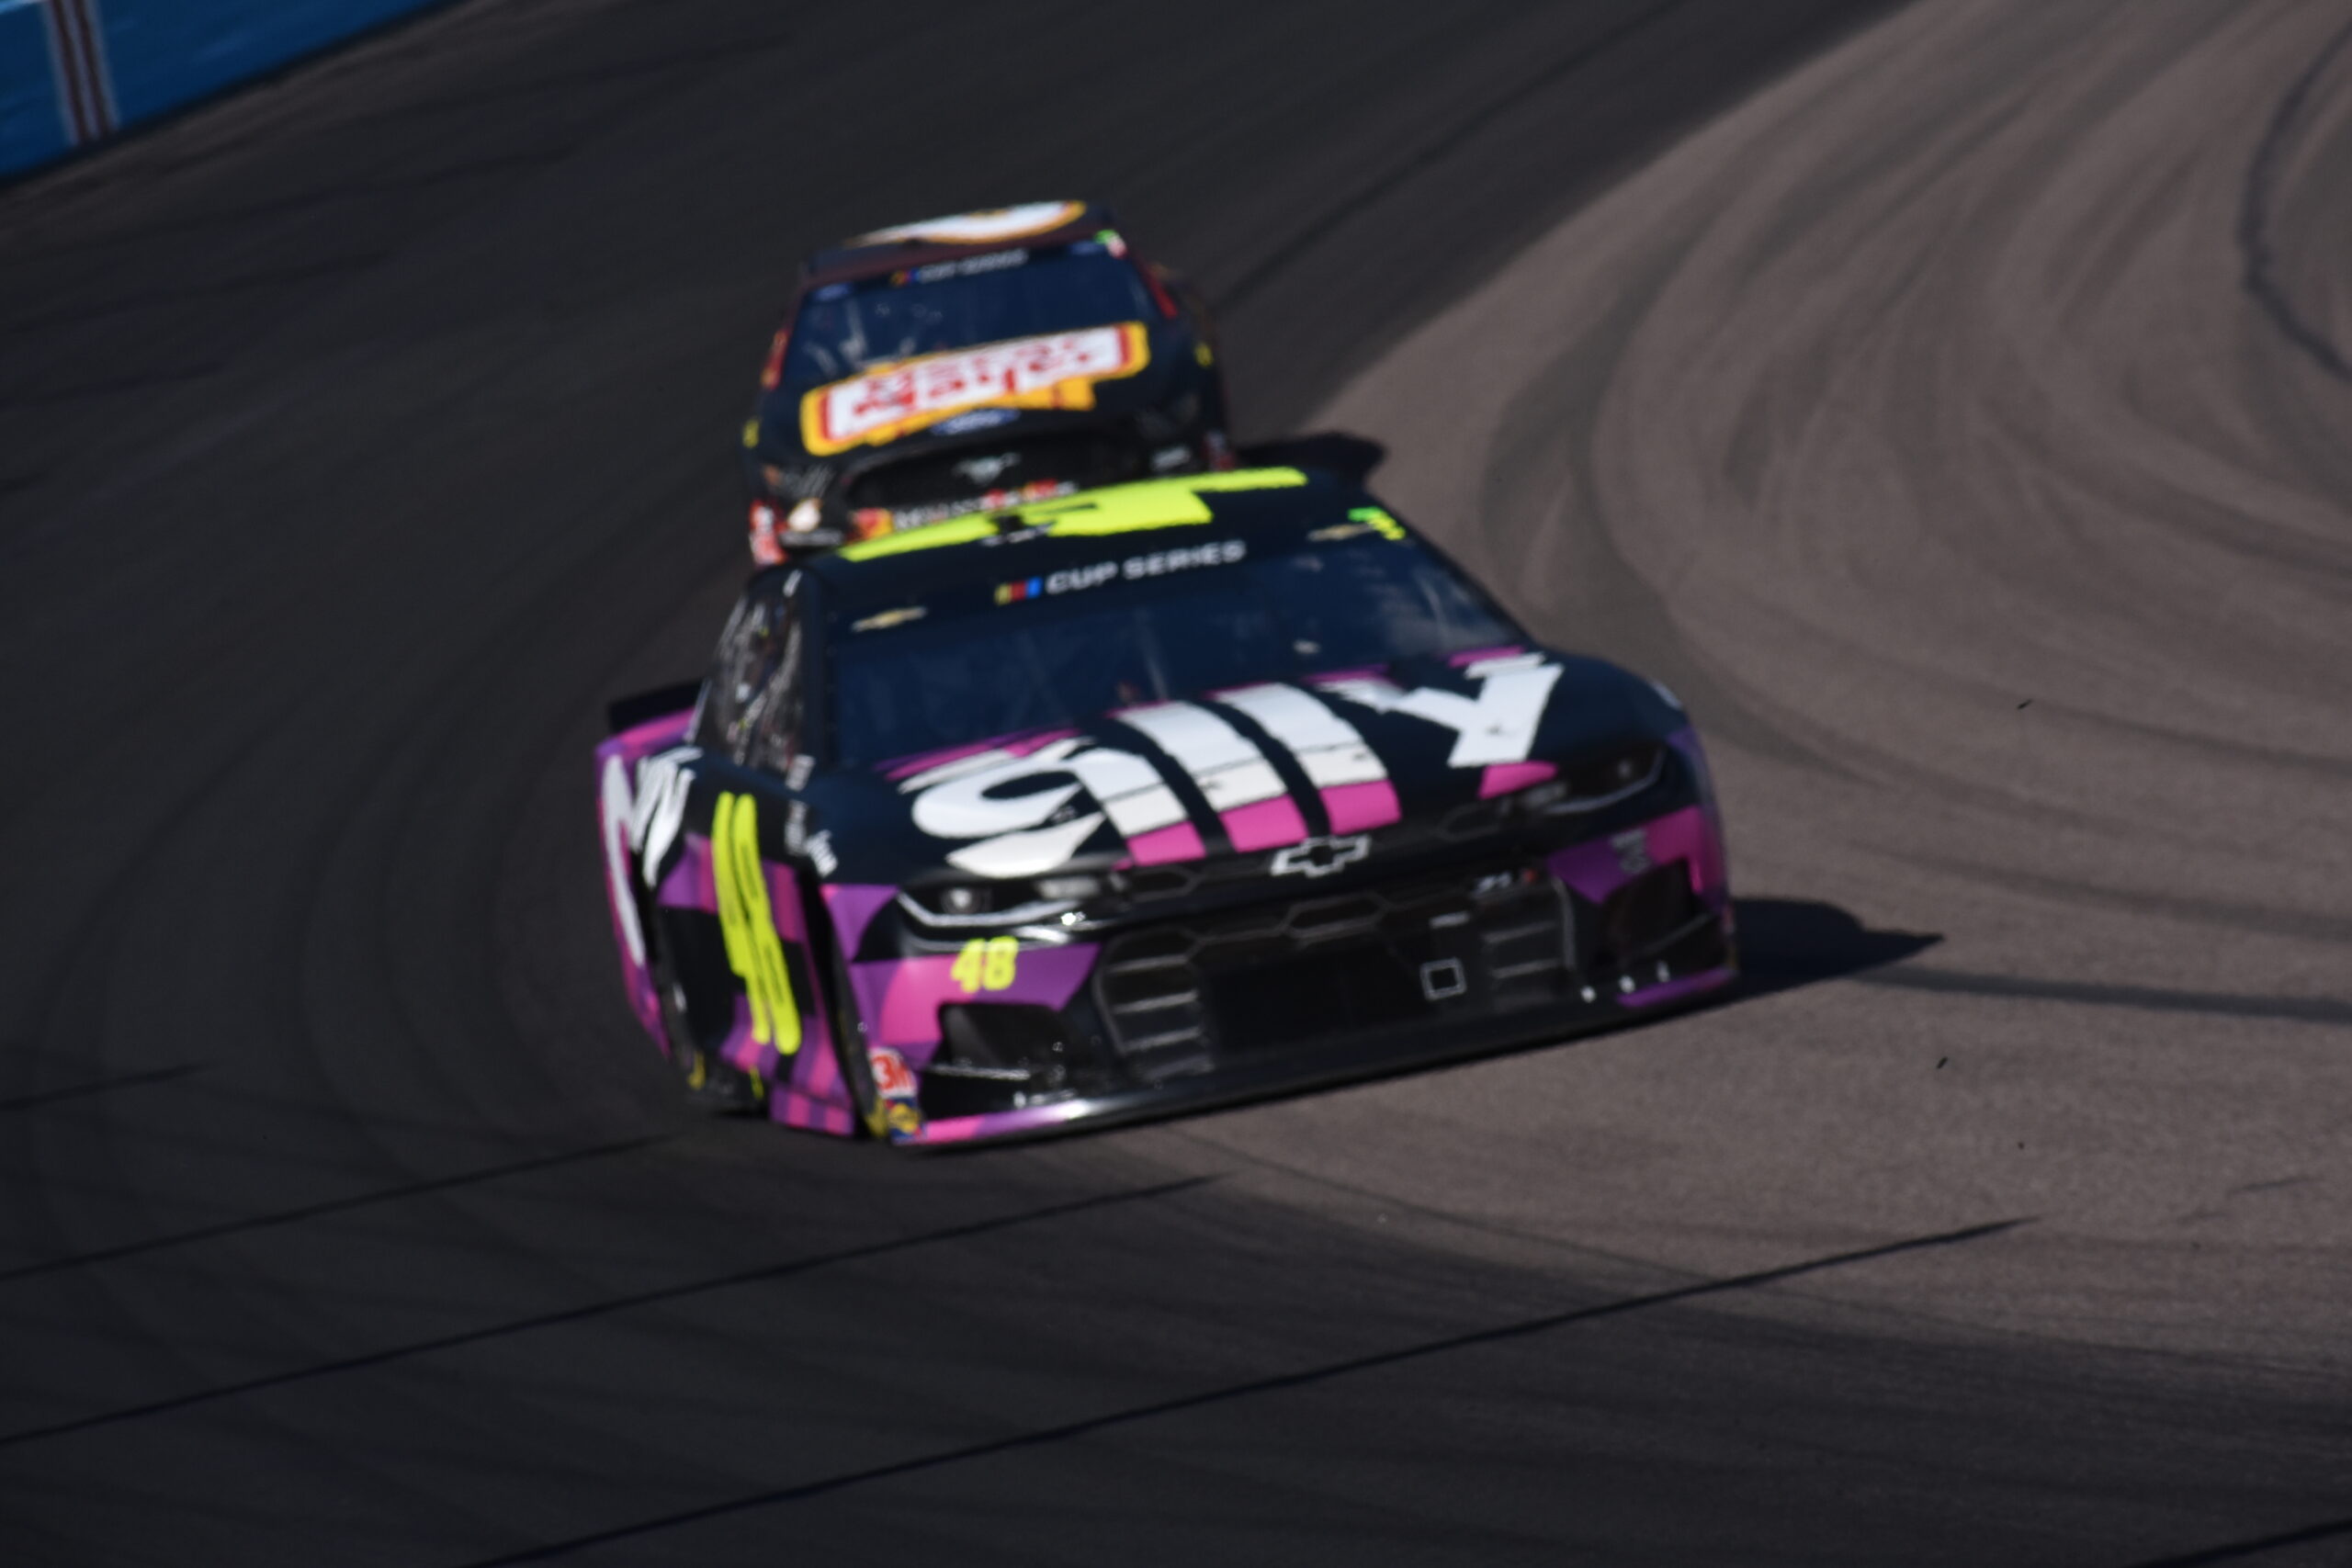 By all means, Jimmie Johnson's legacy will echo beyond his 20 years of excellence. (Could Joey Logano bring his second NASCAR Cup Series title home in 2020? (Photo Credit: Landen Ciardullo/TPF)